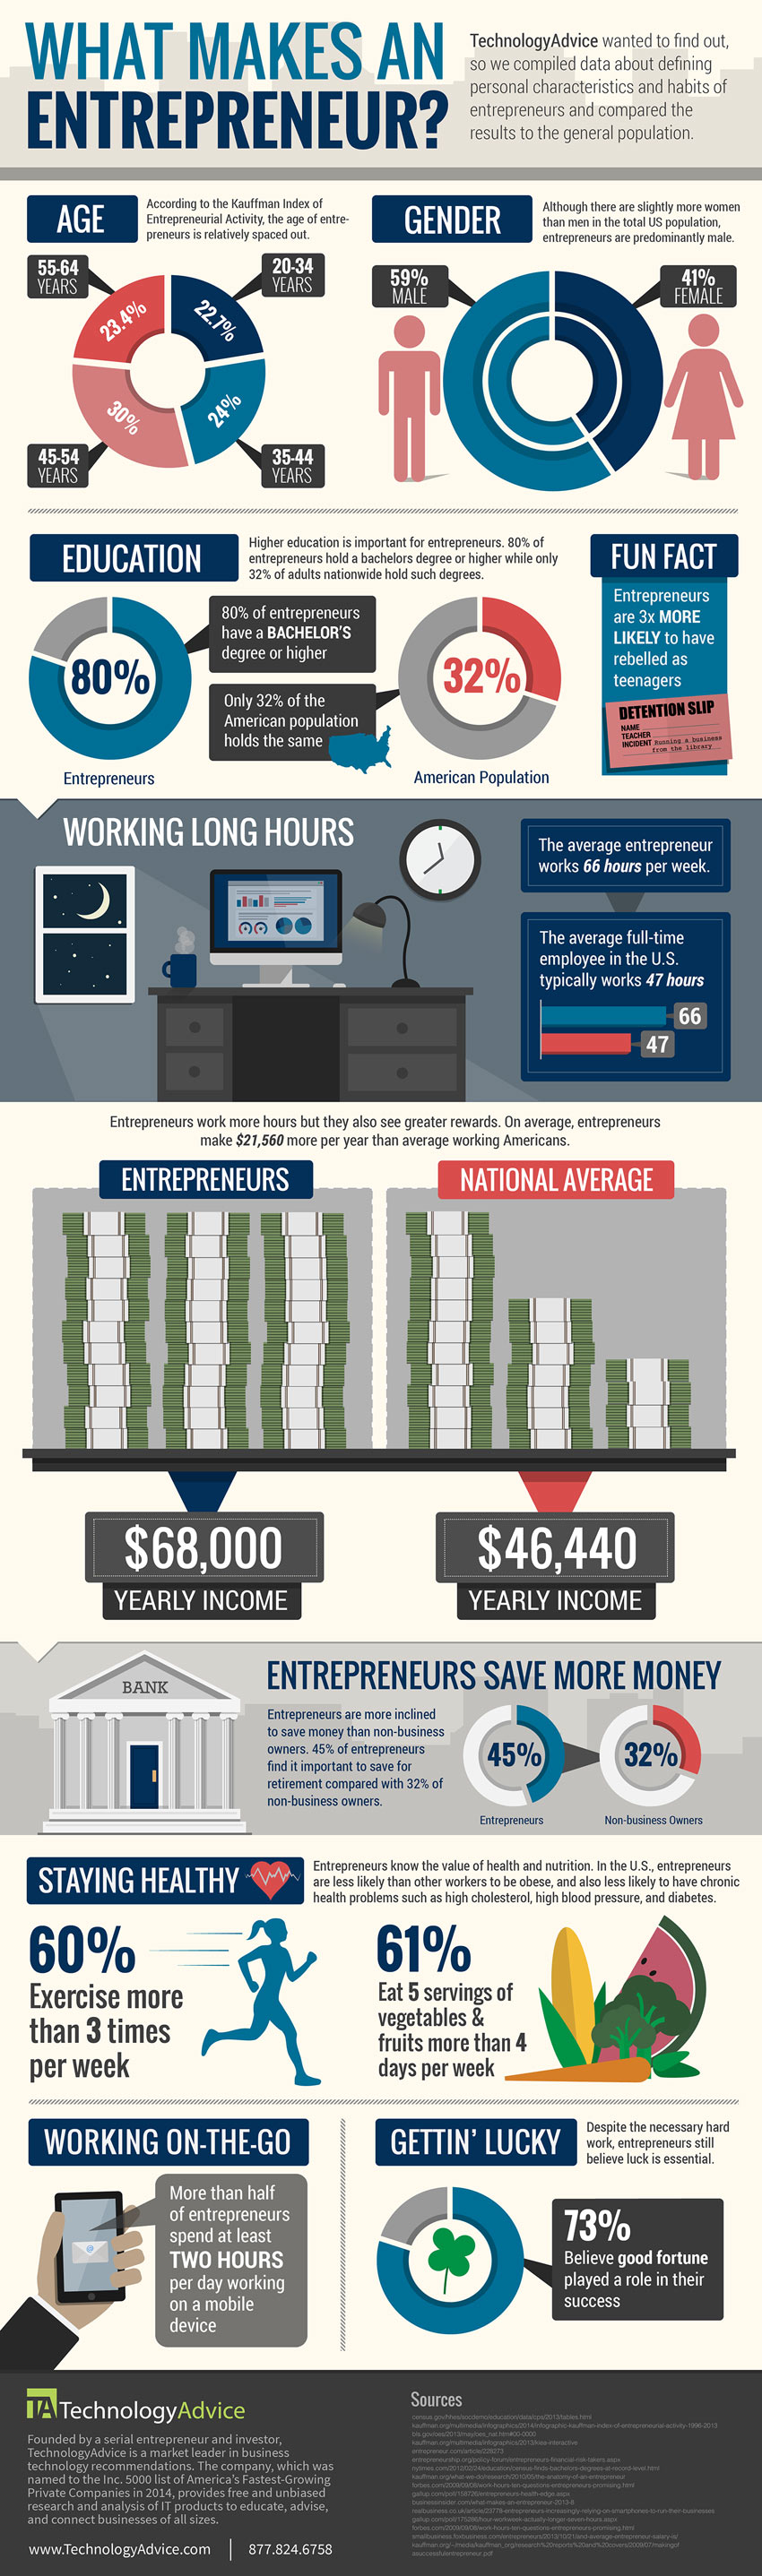 What makes an entrepreneur infographic